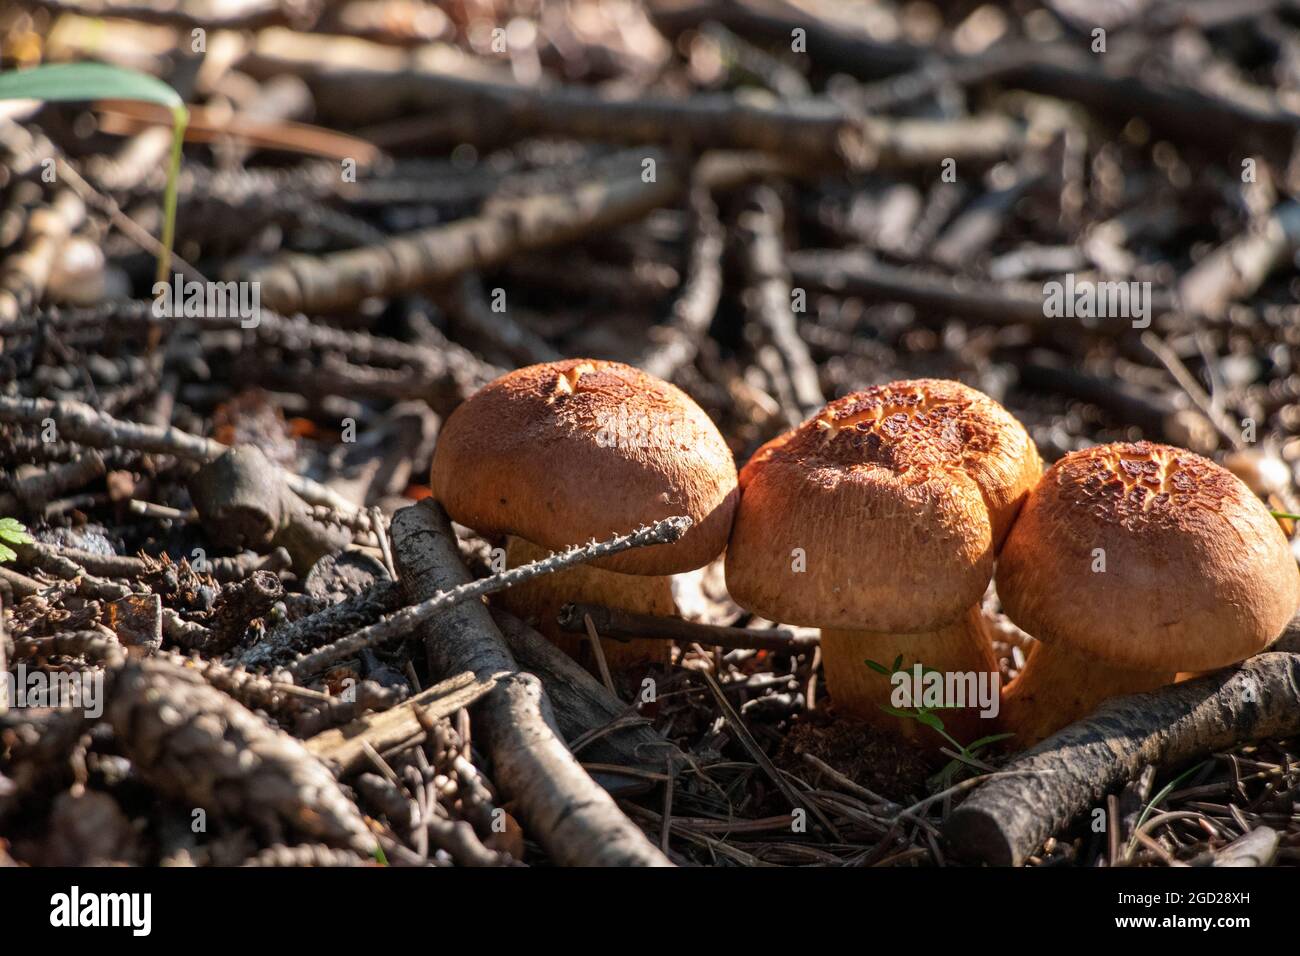 Group of young mushrooms Stock Photo